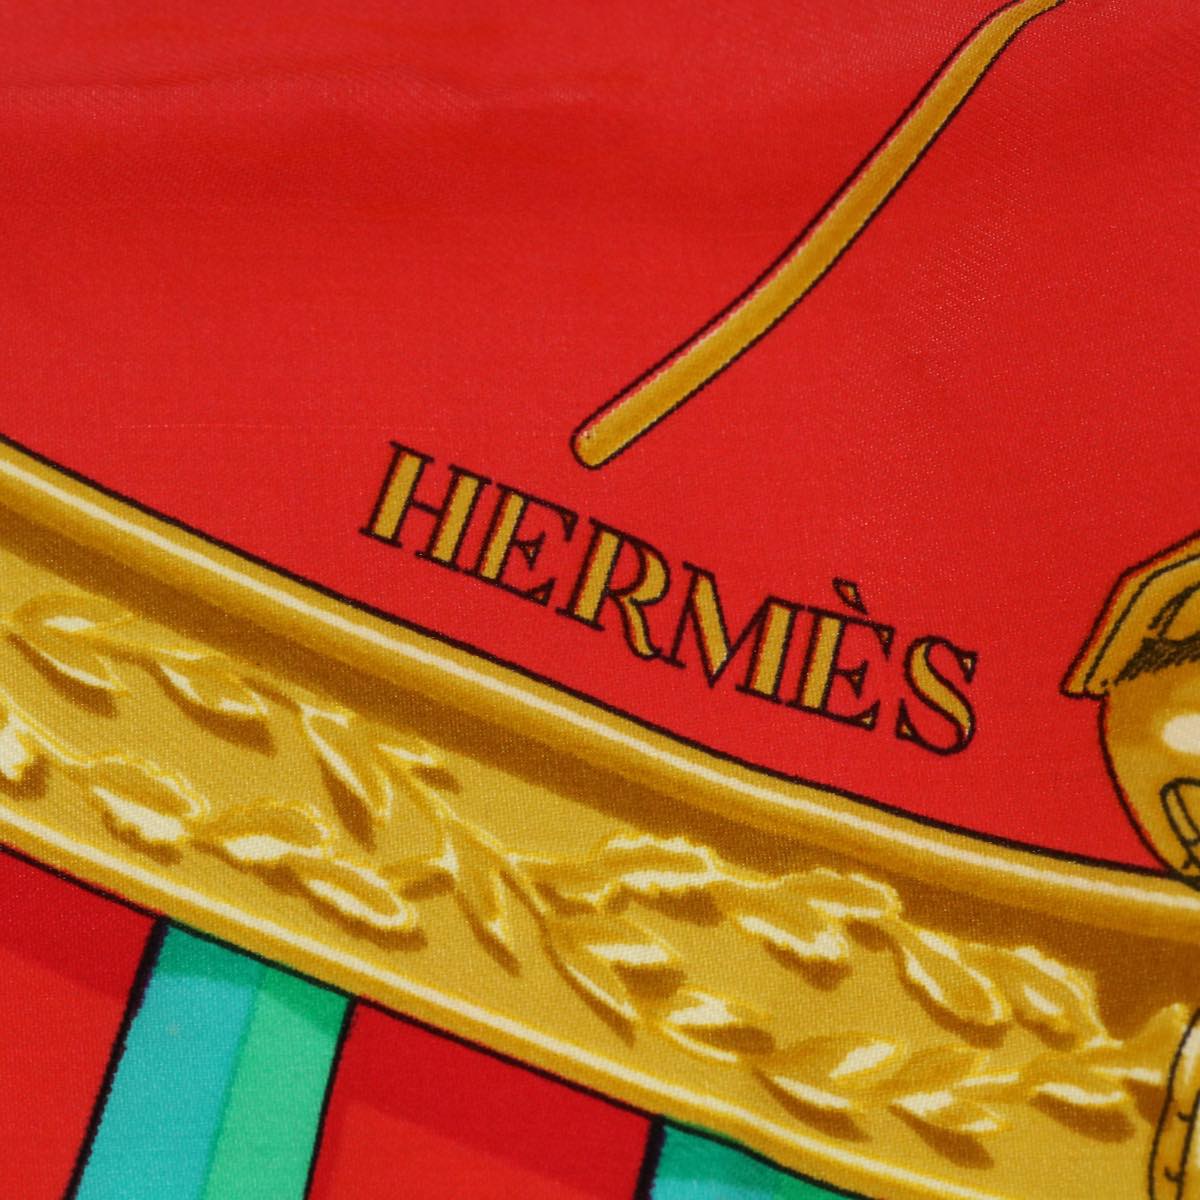 HERMES Carre 90 La MARINE a RAMES Scarf Silk Red Auth 51672